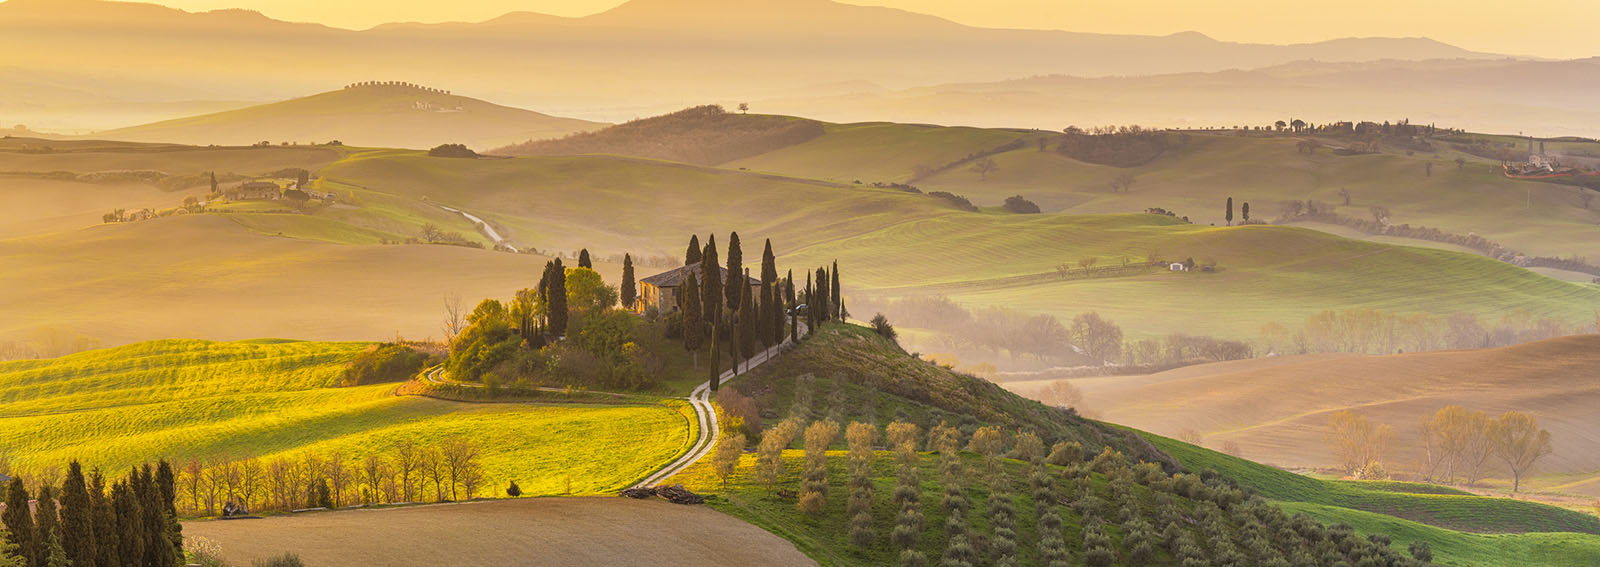 Italy, Tuscany, San Quirico D'Orcia, Podere Belvedere, Green hills, olive gardens and small vineyard under rays of morning sun